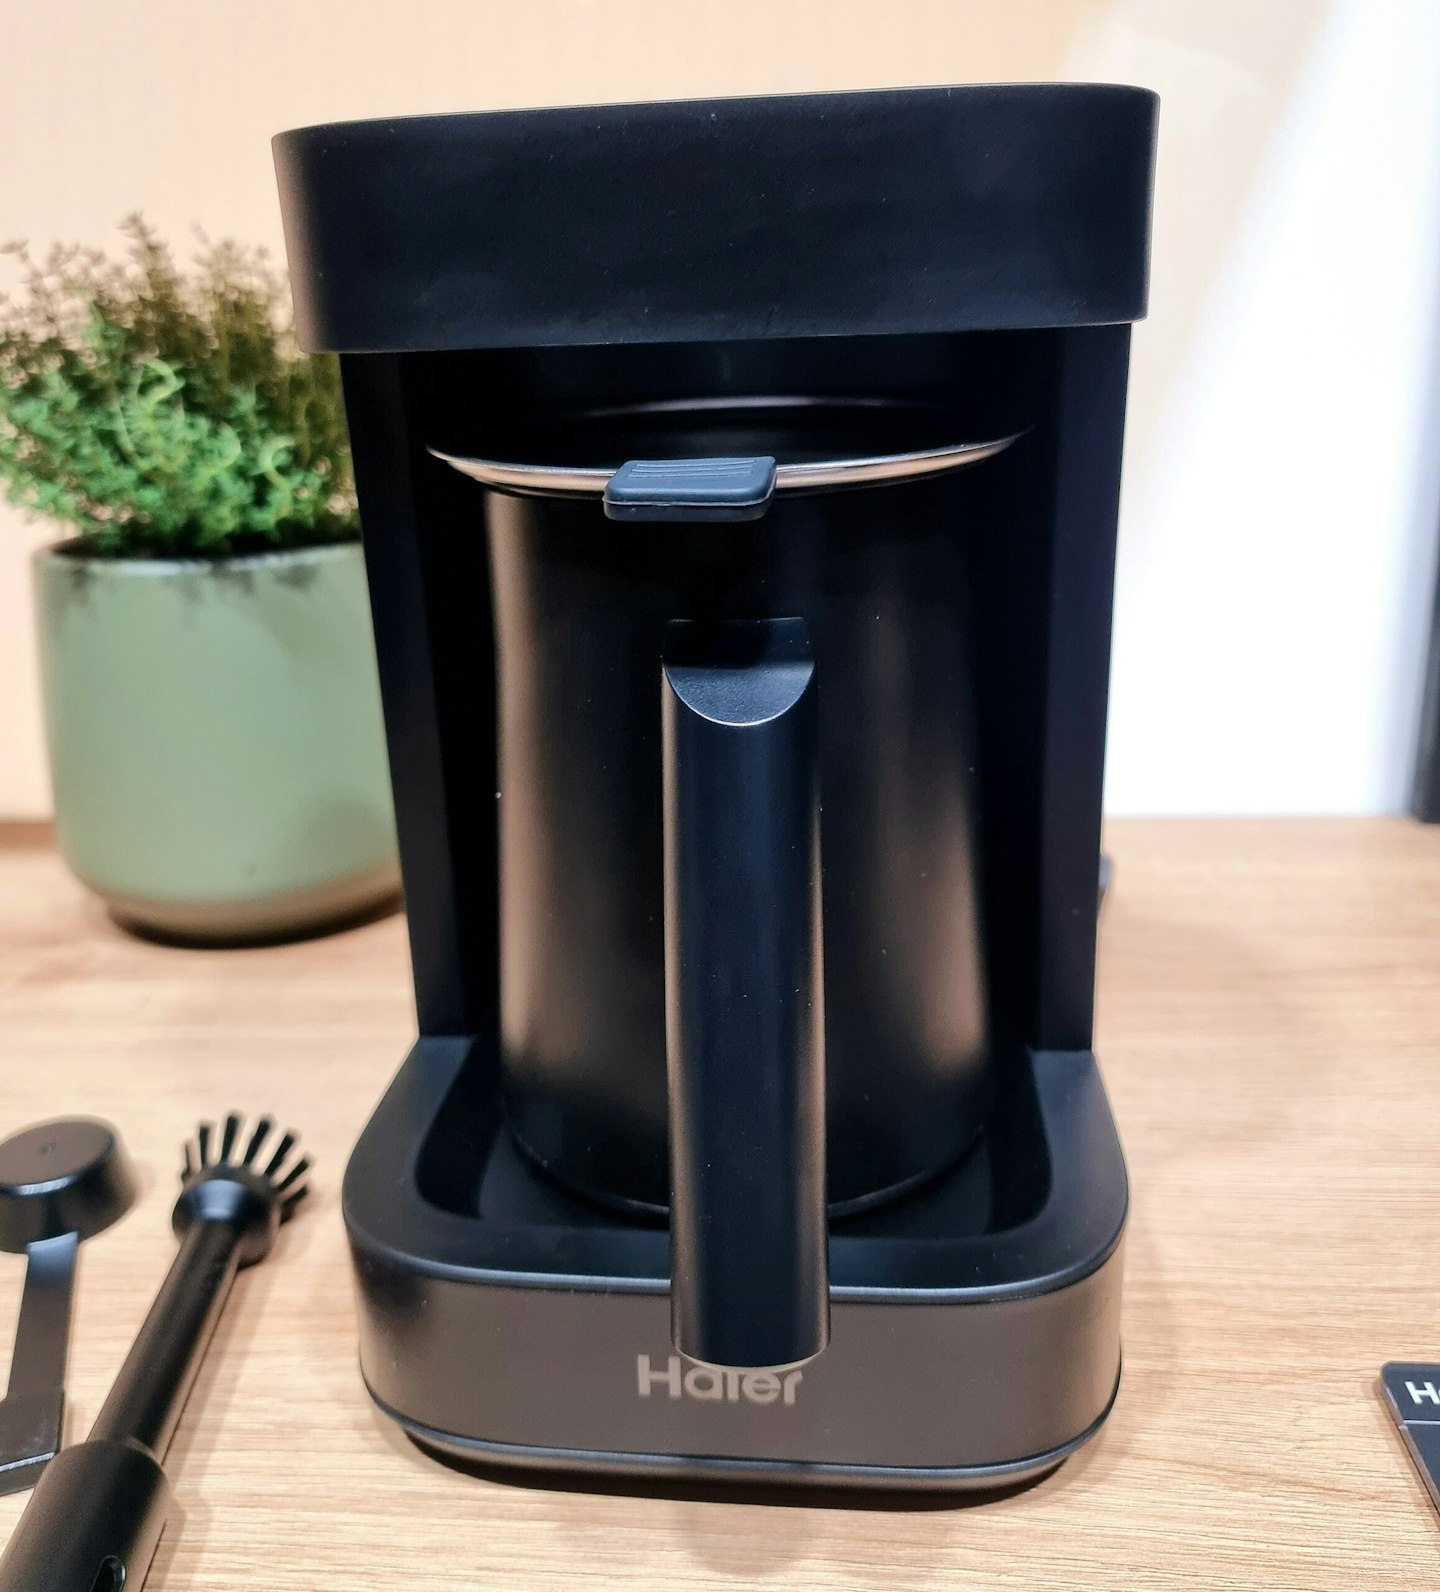 Haier Multi Beverage Maker on a wooden surface